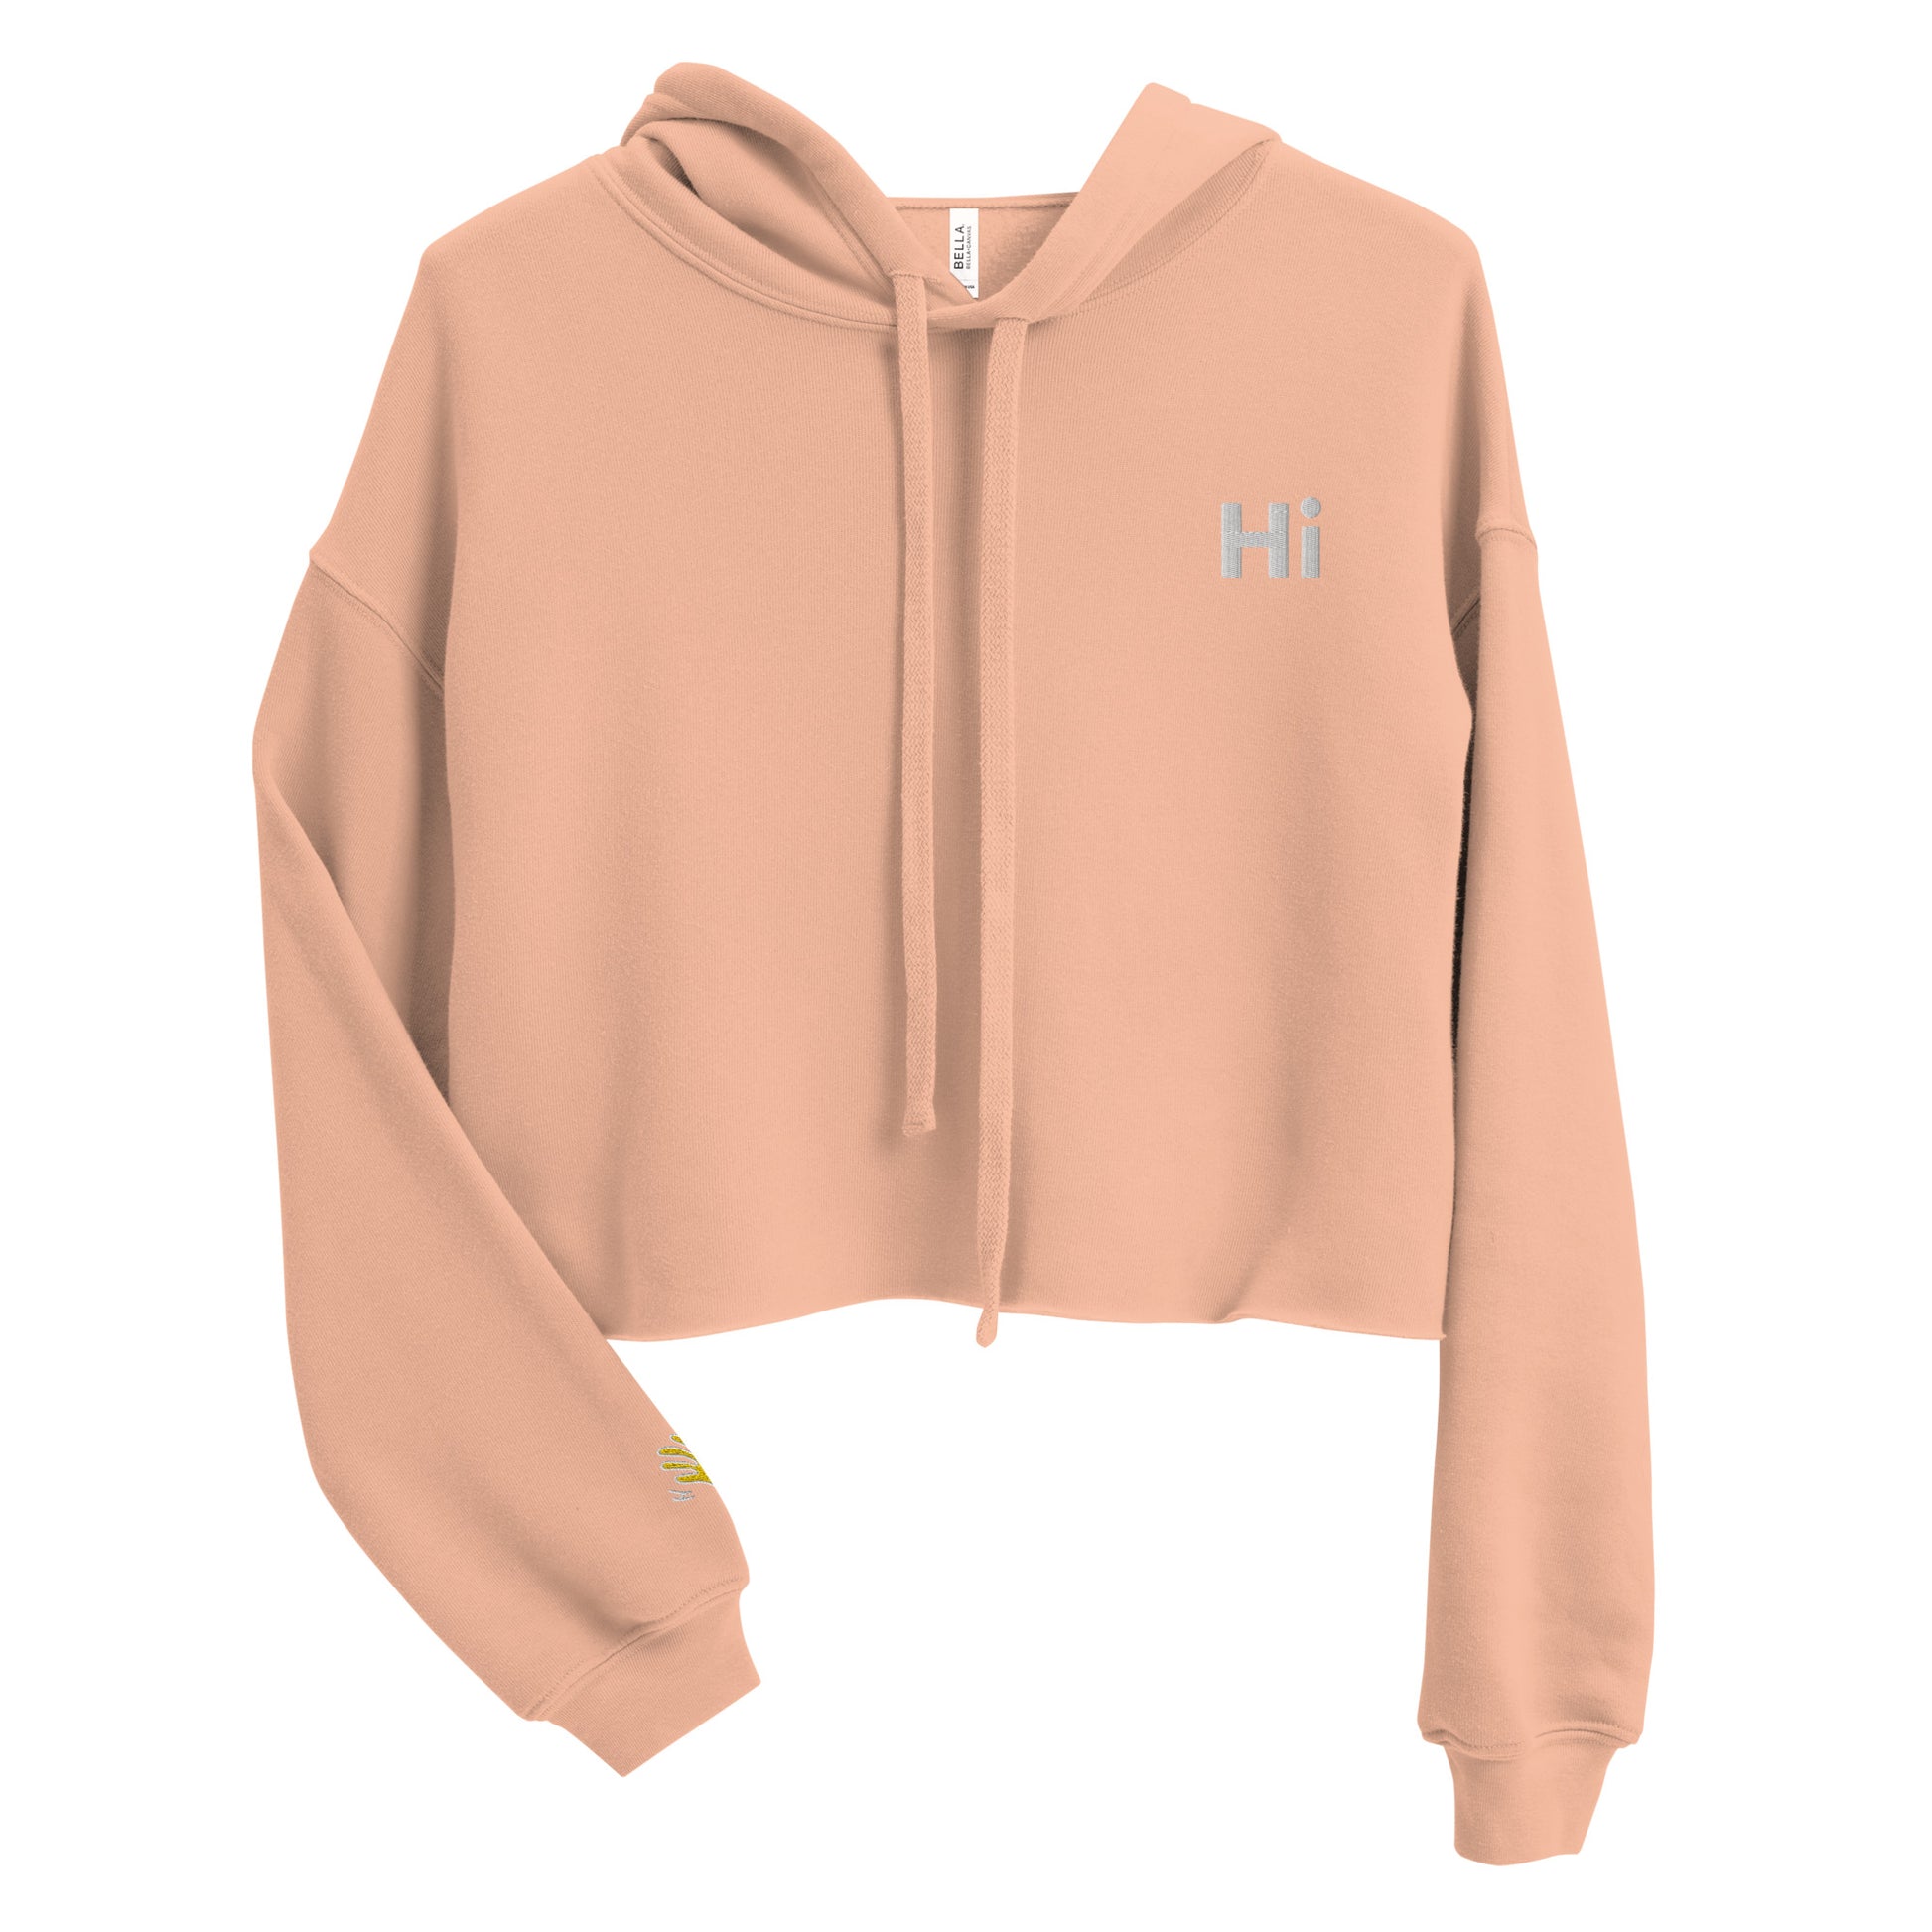 Hi Womens Cropped Hoodie by Happy interactions in Peach